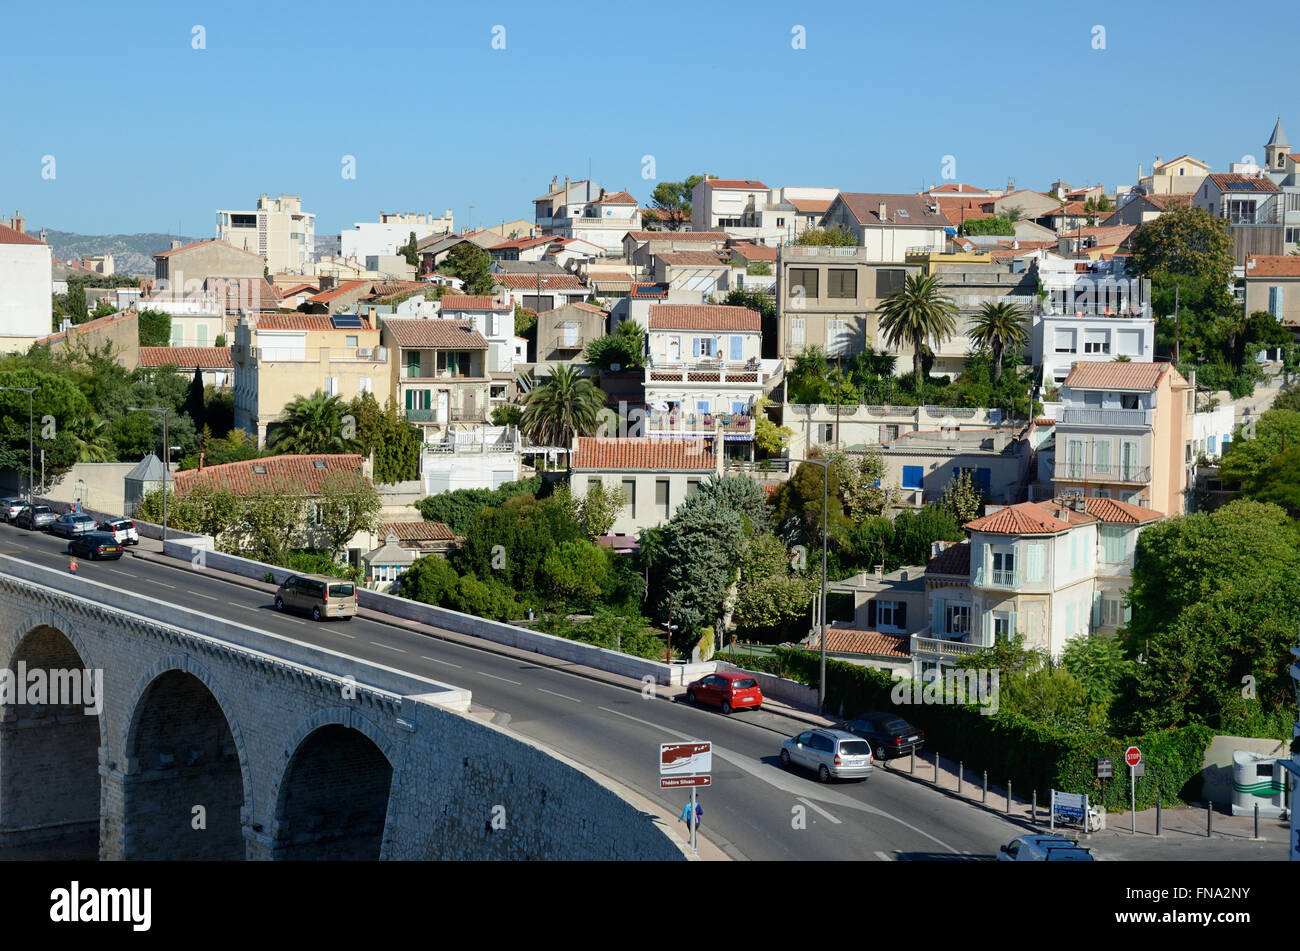 Villas and Houses Above the Anse de la Fausse Monnaie and the Corniche Kennedy Coast Road Marseille France Stock Photo